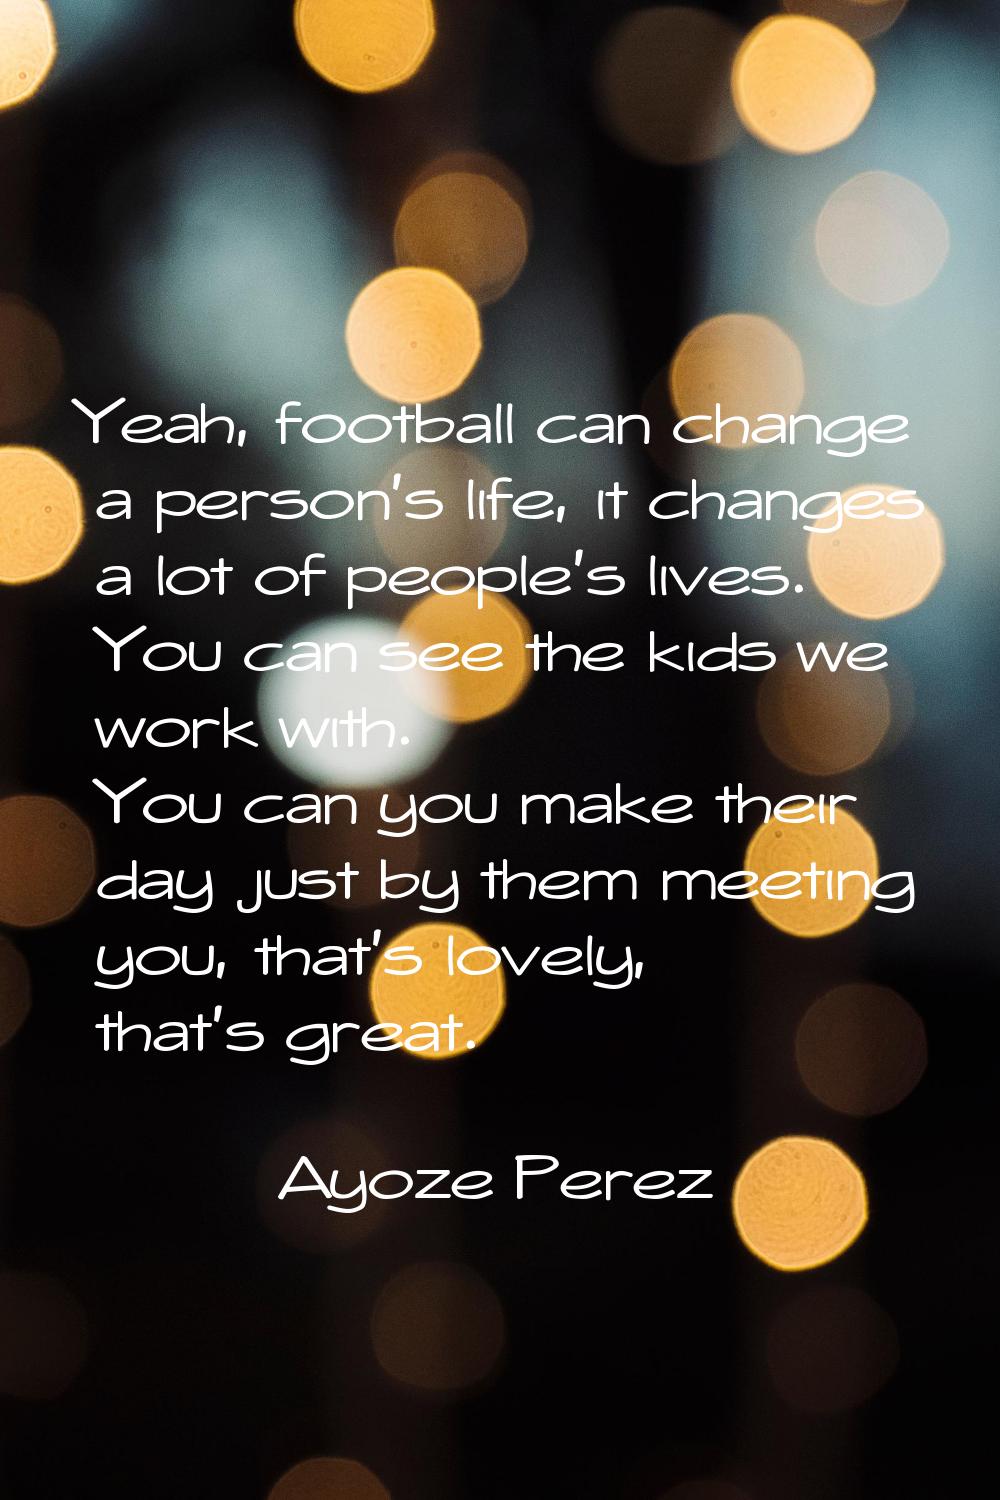 Yeah, football can change a person's life, it changes a lot of people's lives. You can see the kids